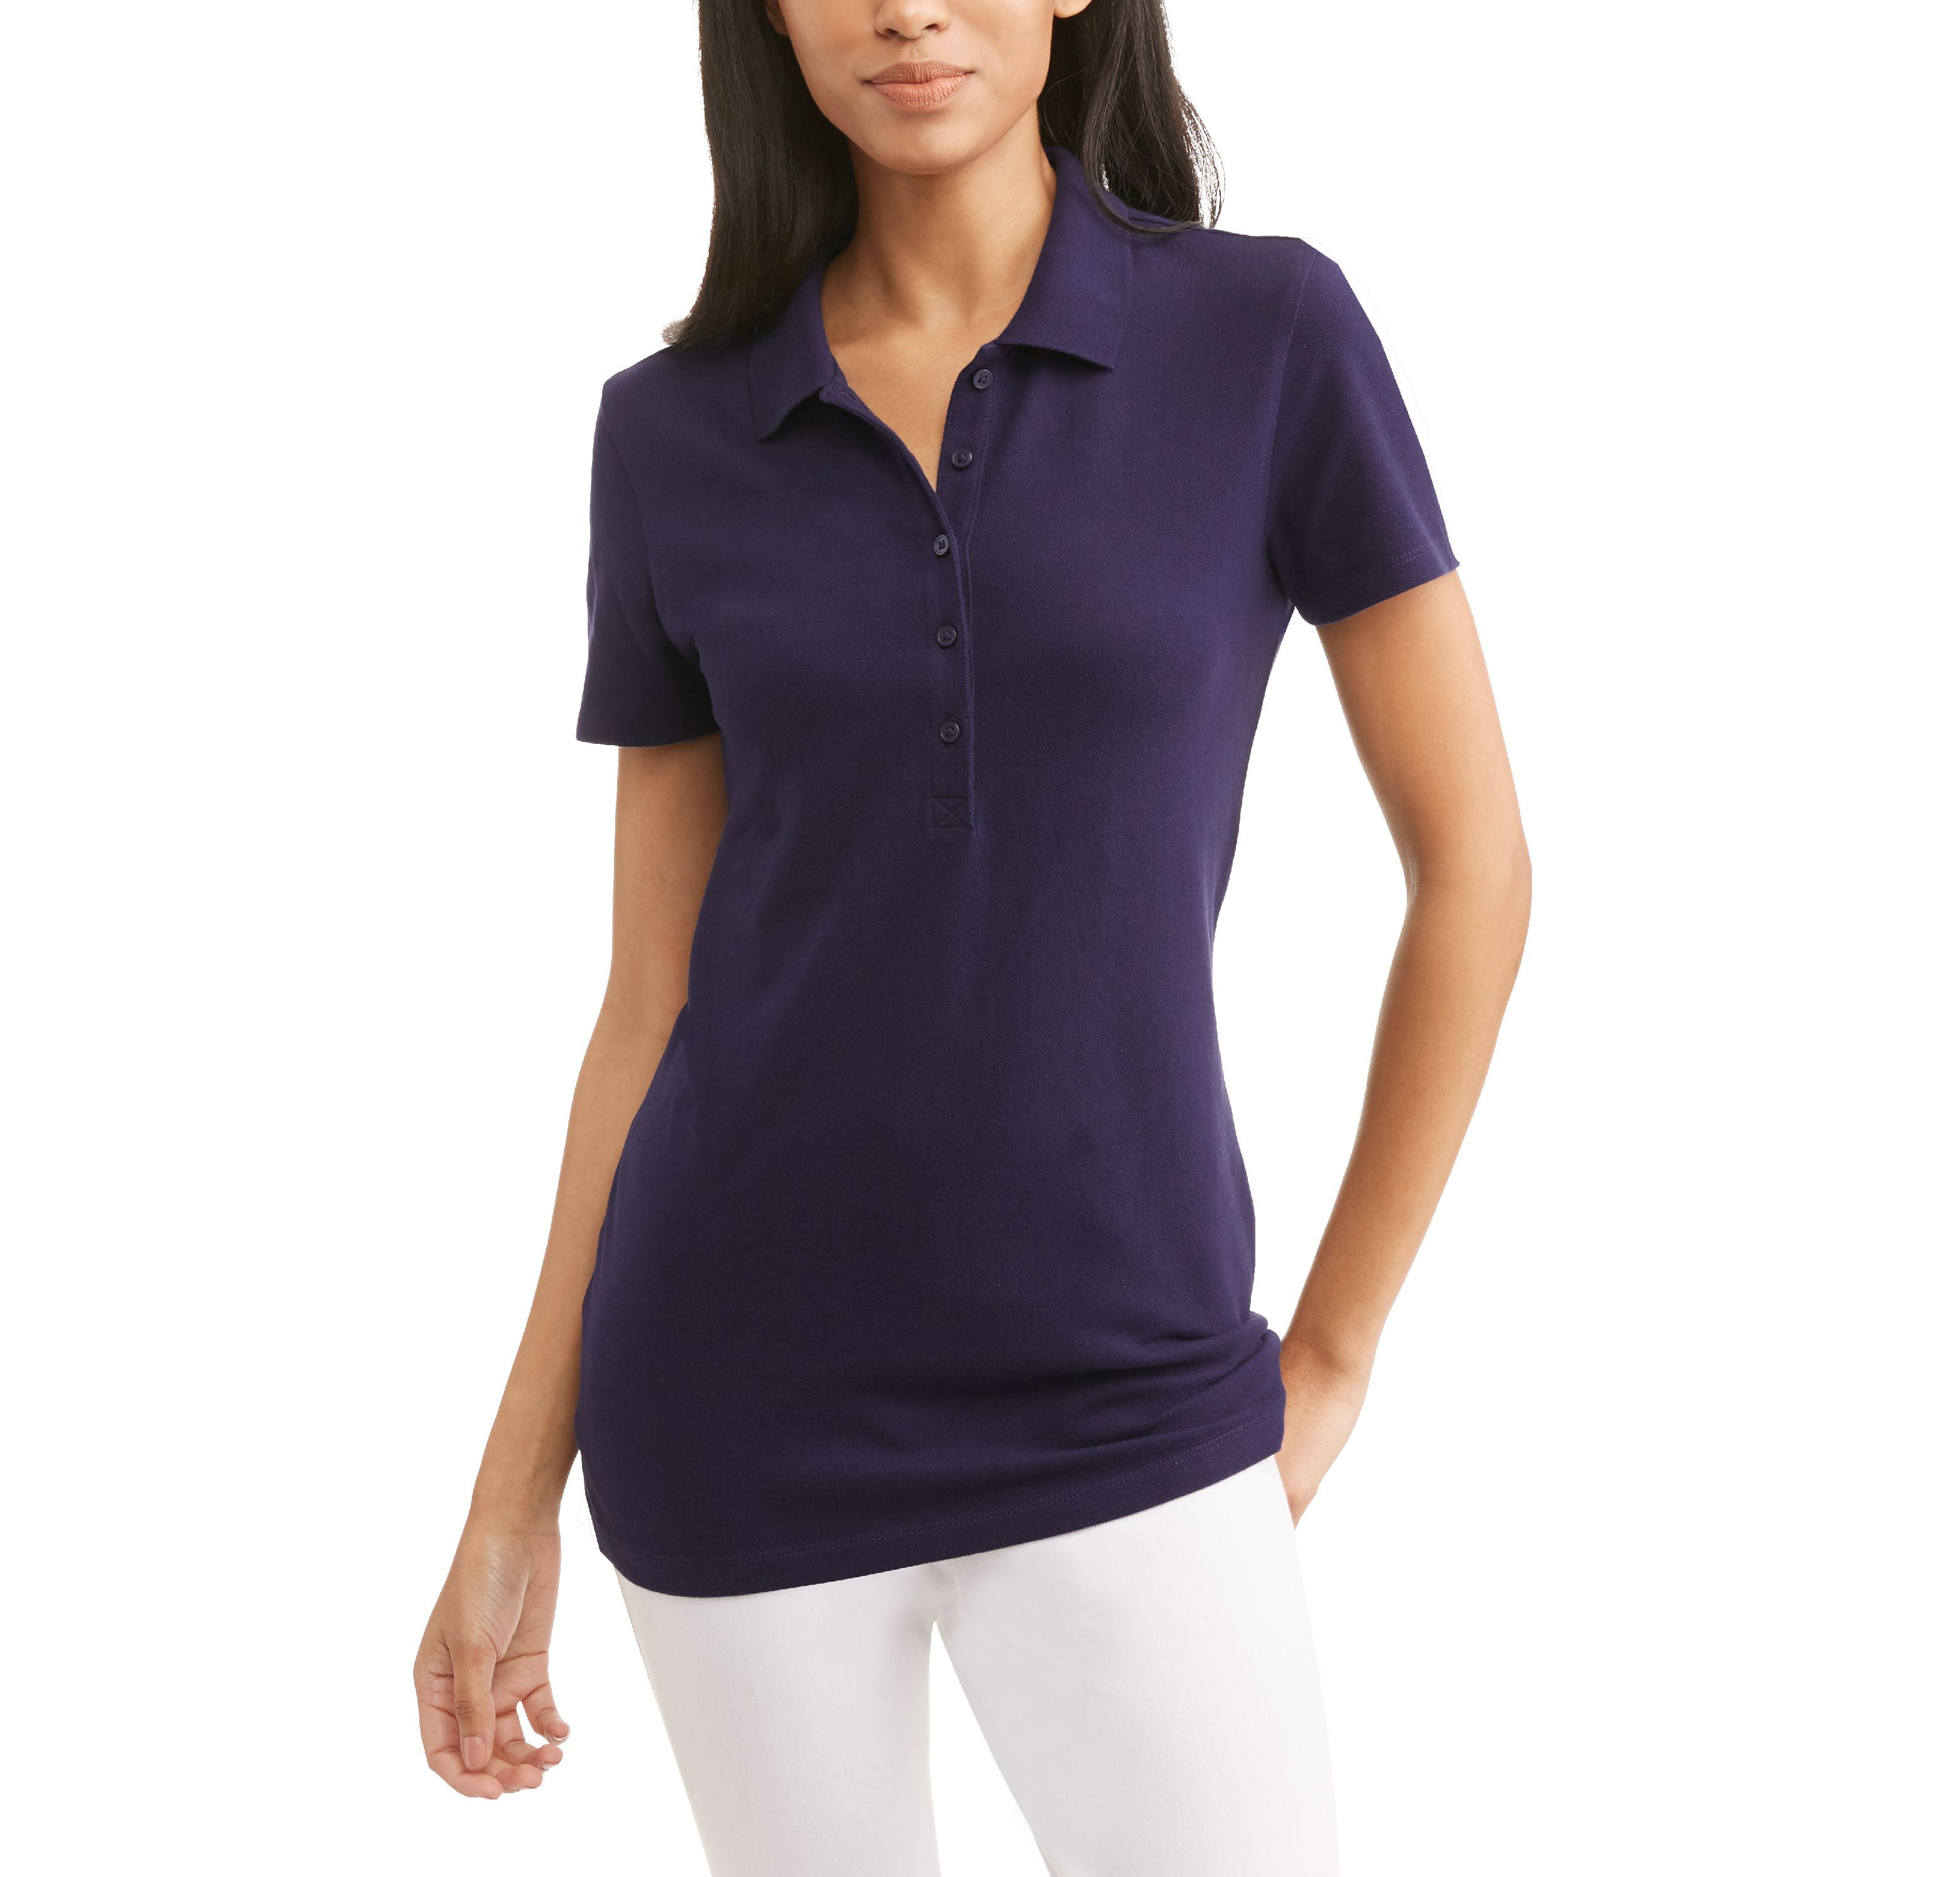 polo t shirts for ladies